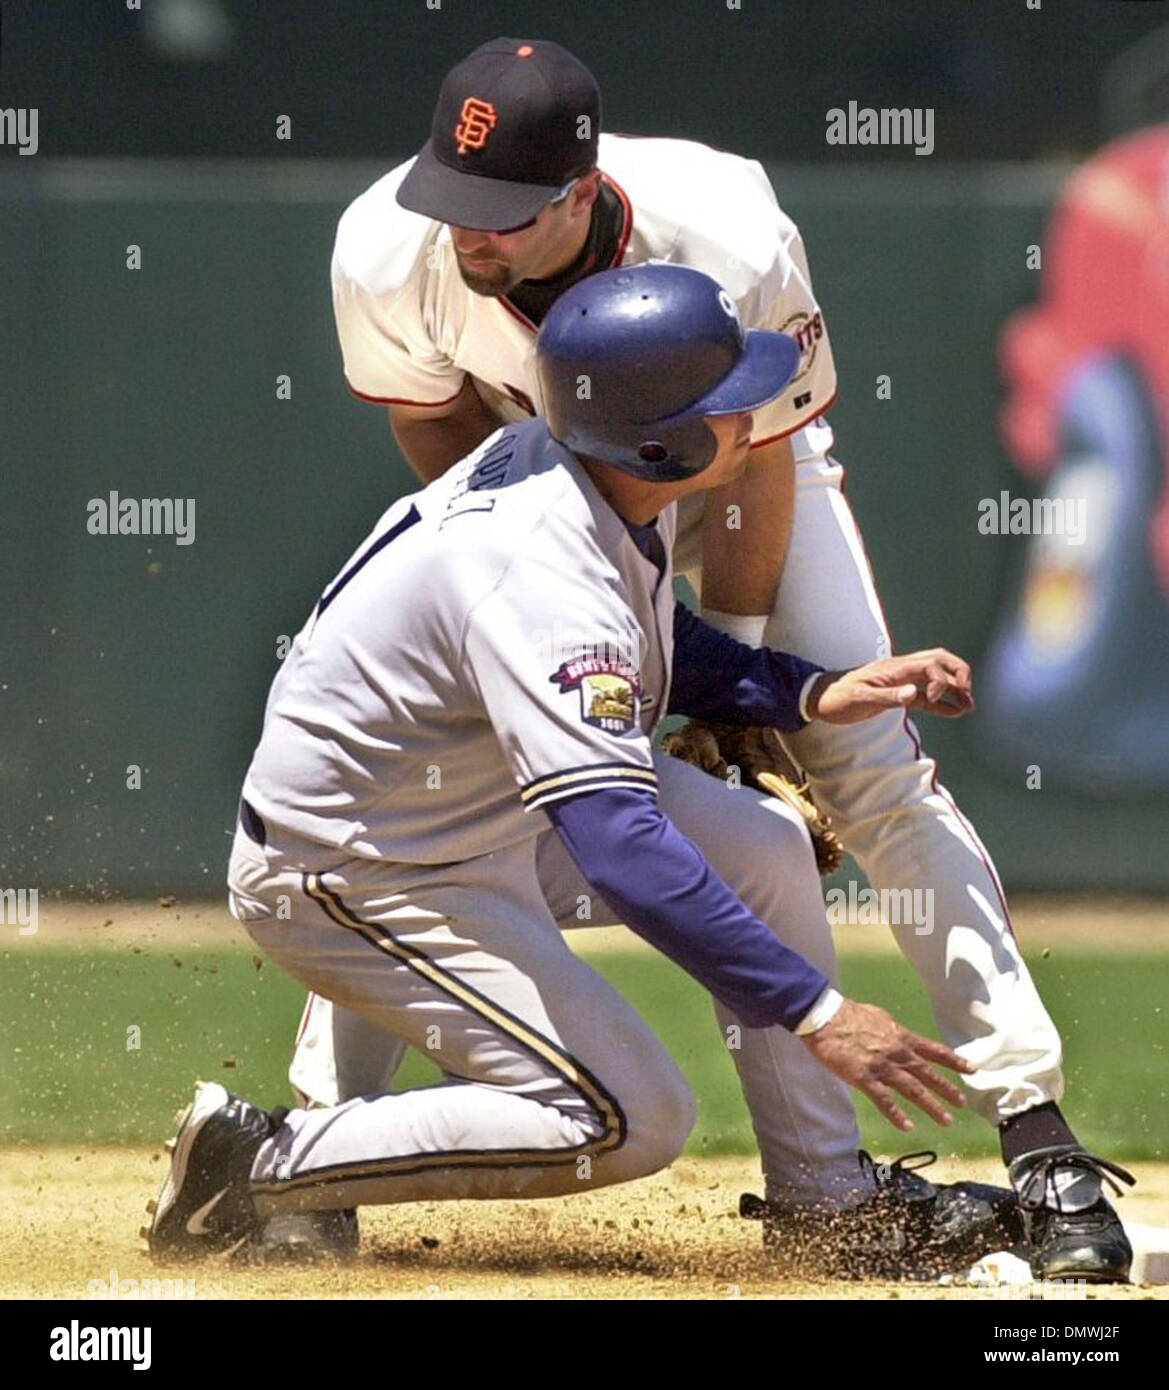 Jul 07, 2001; San Francisco, CA, USA; Giants #35 Rich Aurilia  (top) collides with Brewers #1 Luis Lopez at second base during the top of the 5th inning in San Francisco, Calif., on Saturday, July 7, 2001. An error on the play advanced Lopez to third base. The Brewers went on to win the game 13-3. Stock Photo